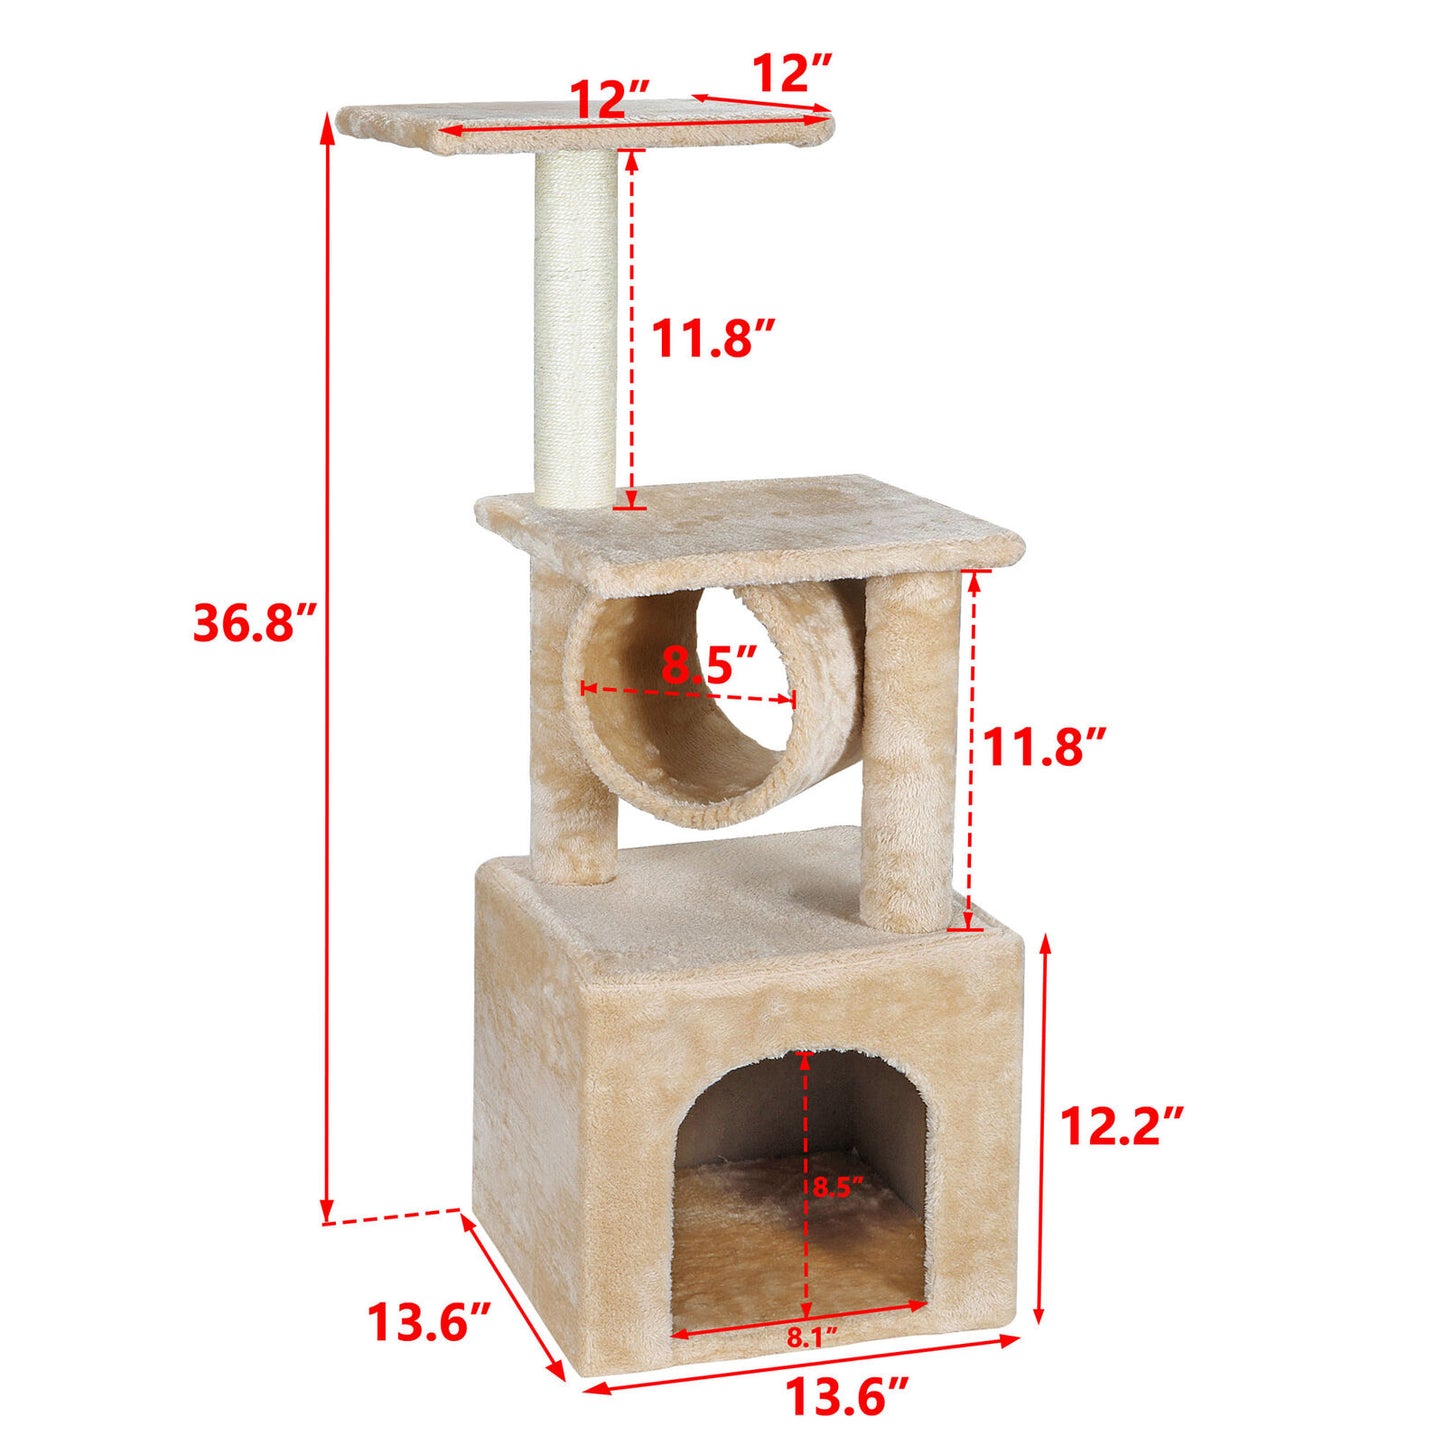 ACTIVITY CAT TREE TOWERS PET HOUSE CAVE WITH SCRACHING POSTS CLIMBING LADDER